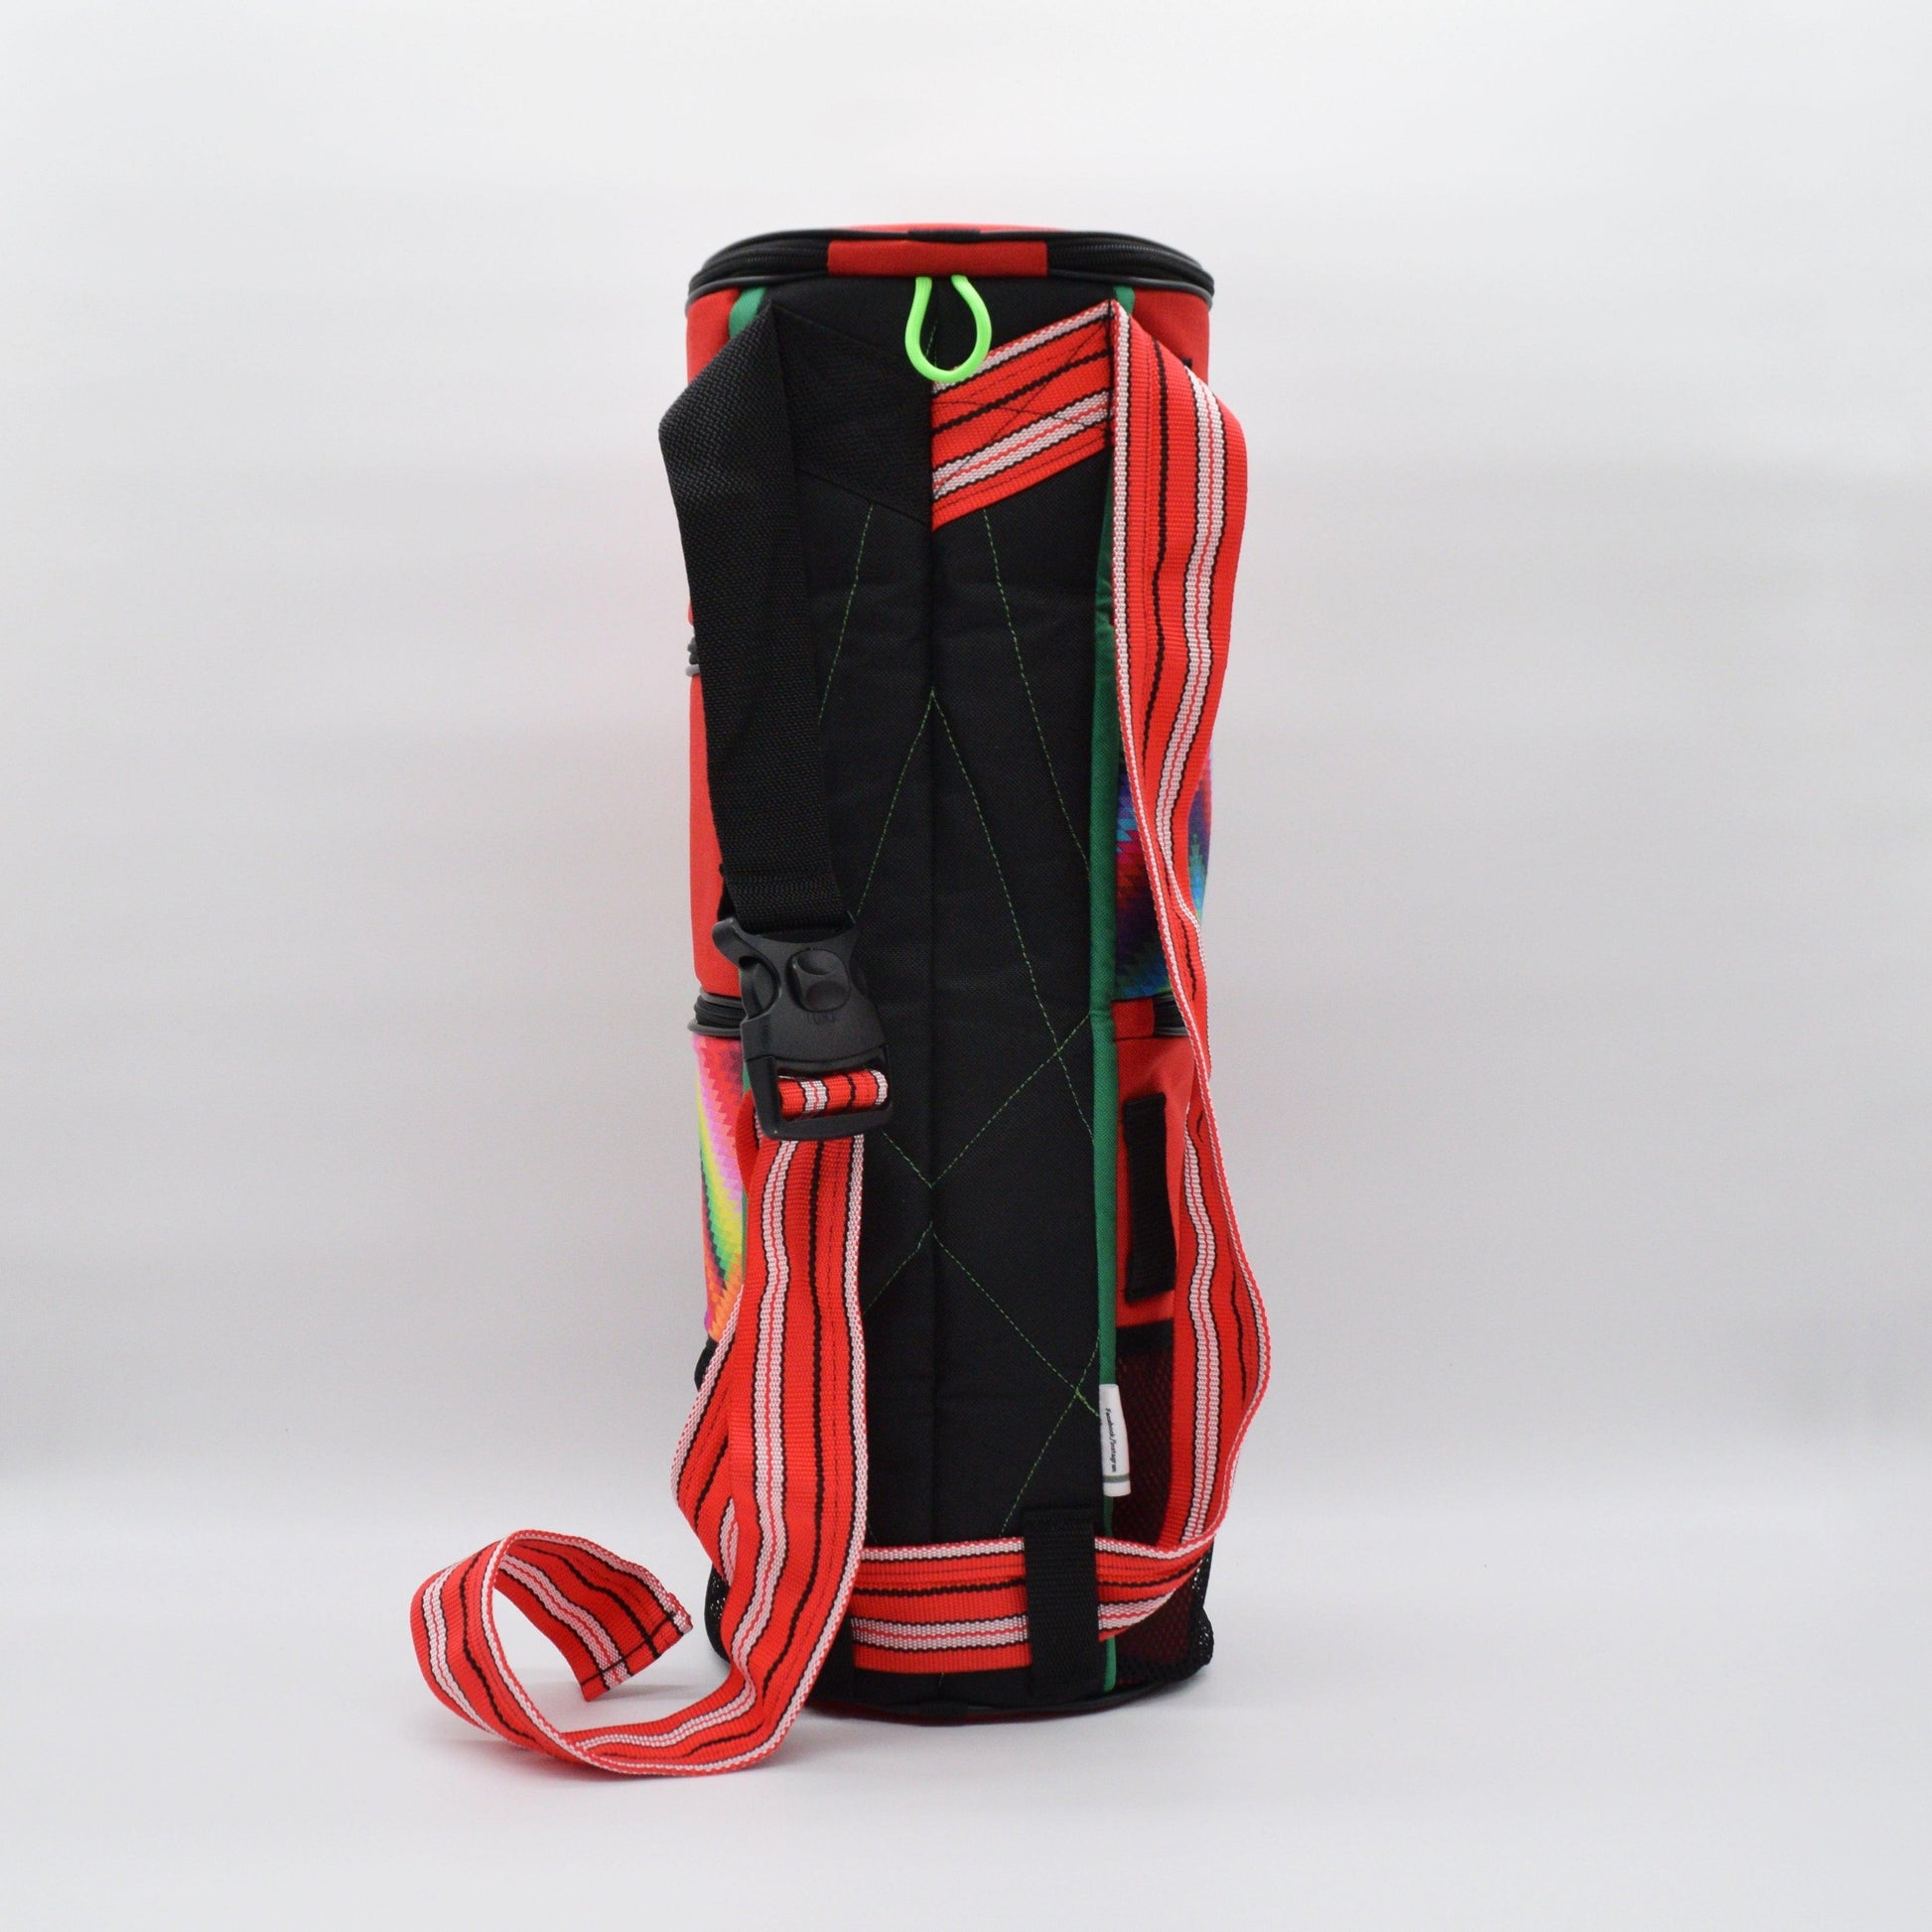 Caterpillar backpack - Red by Creyones, Backpack